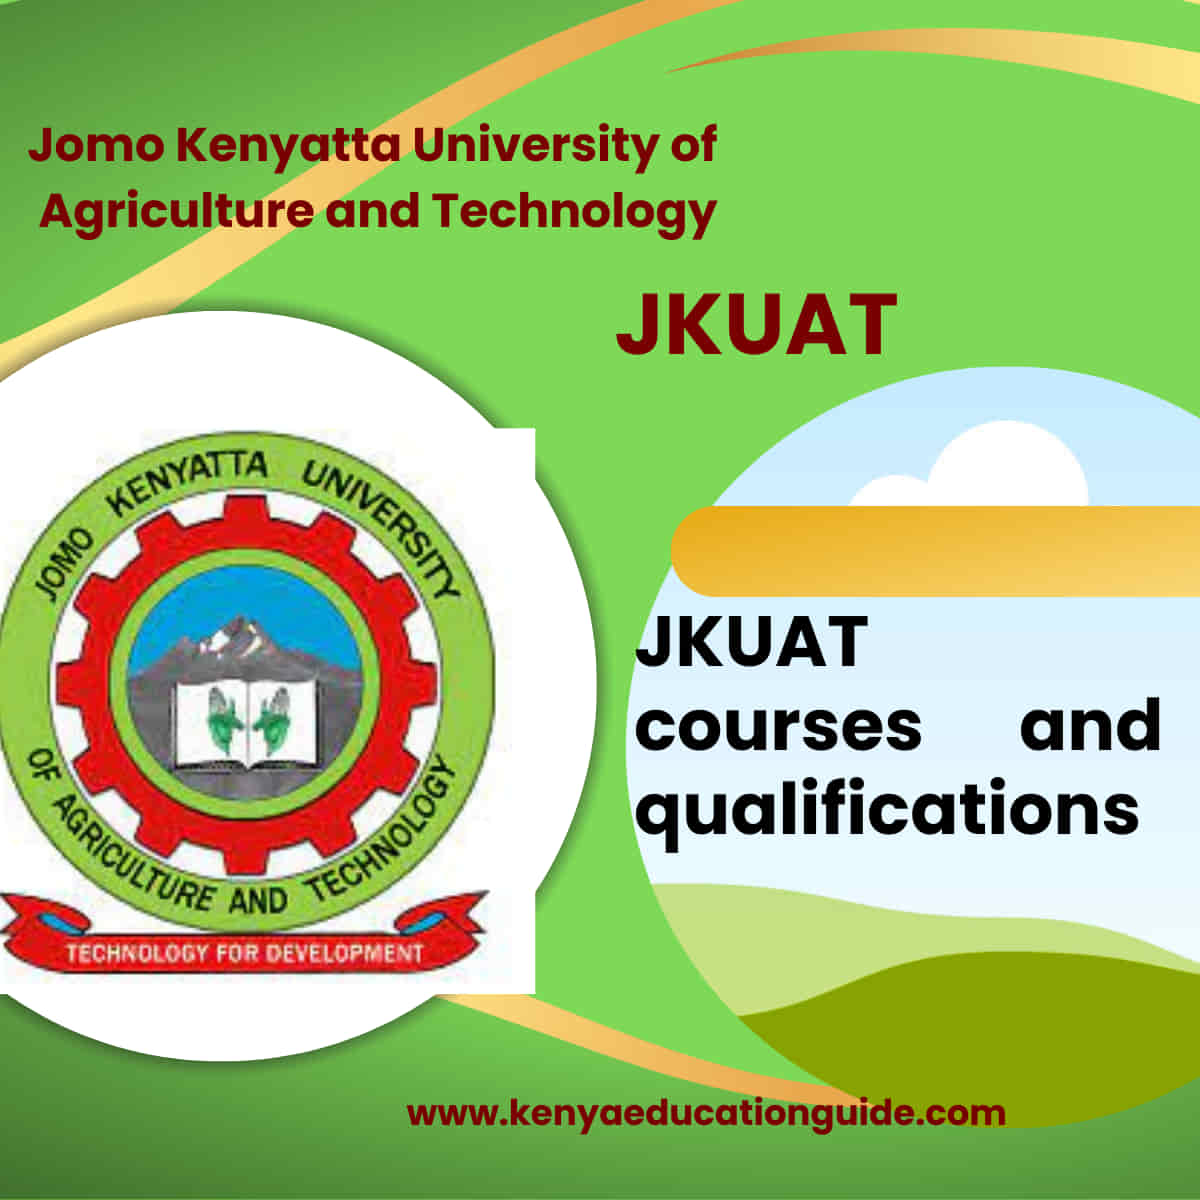 JKUAT courses and qualifications